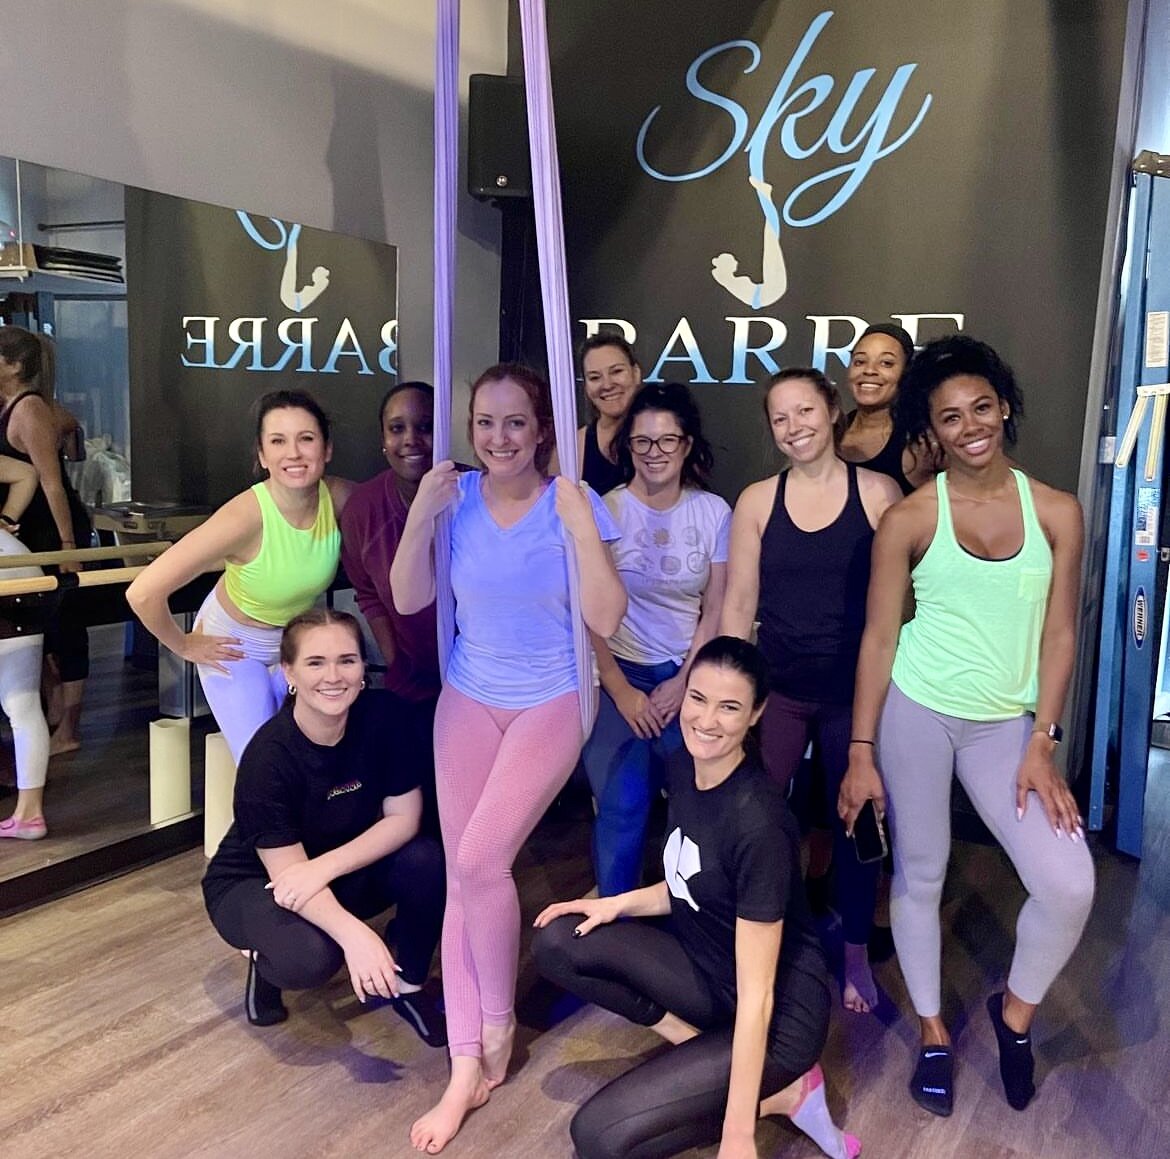 The sky&rsquo;s the limit 🌟

Start your week off strong with an aerial class at The Sky Barre 💪

📸: @paigejohnson_atl

#madisonyards #madisonyardsatl #mymadisonyards #discoveratl #skybarreatl